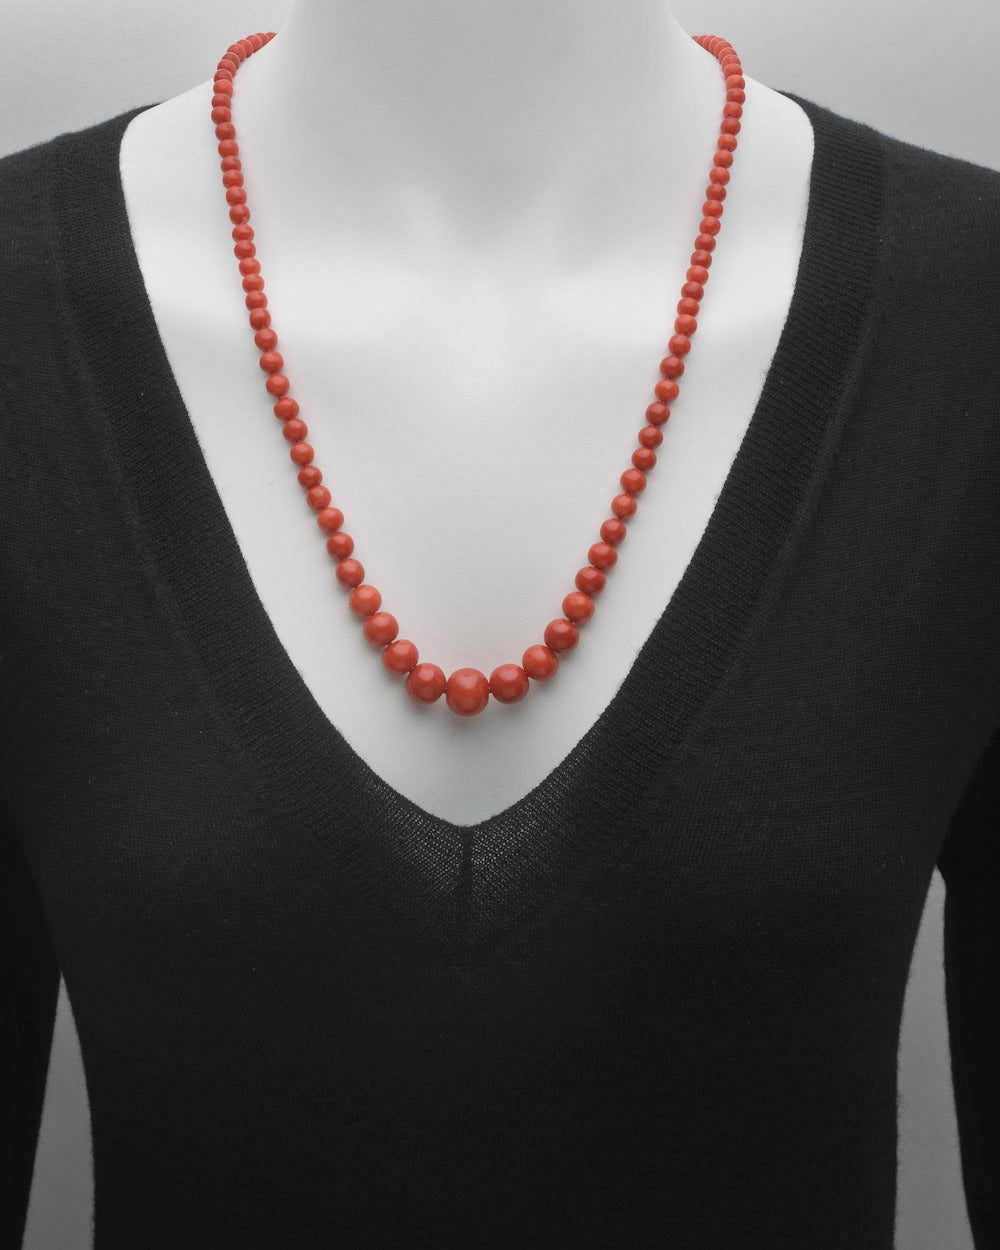 Red coral bead long necklace, designed as a graduated strand of coral beads ranging from 13.5mm to 4.5mm in diameter, secured by a navette-shaped clasp in 14k yellow gold. 28